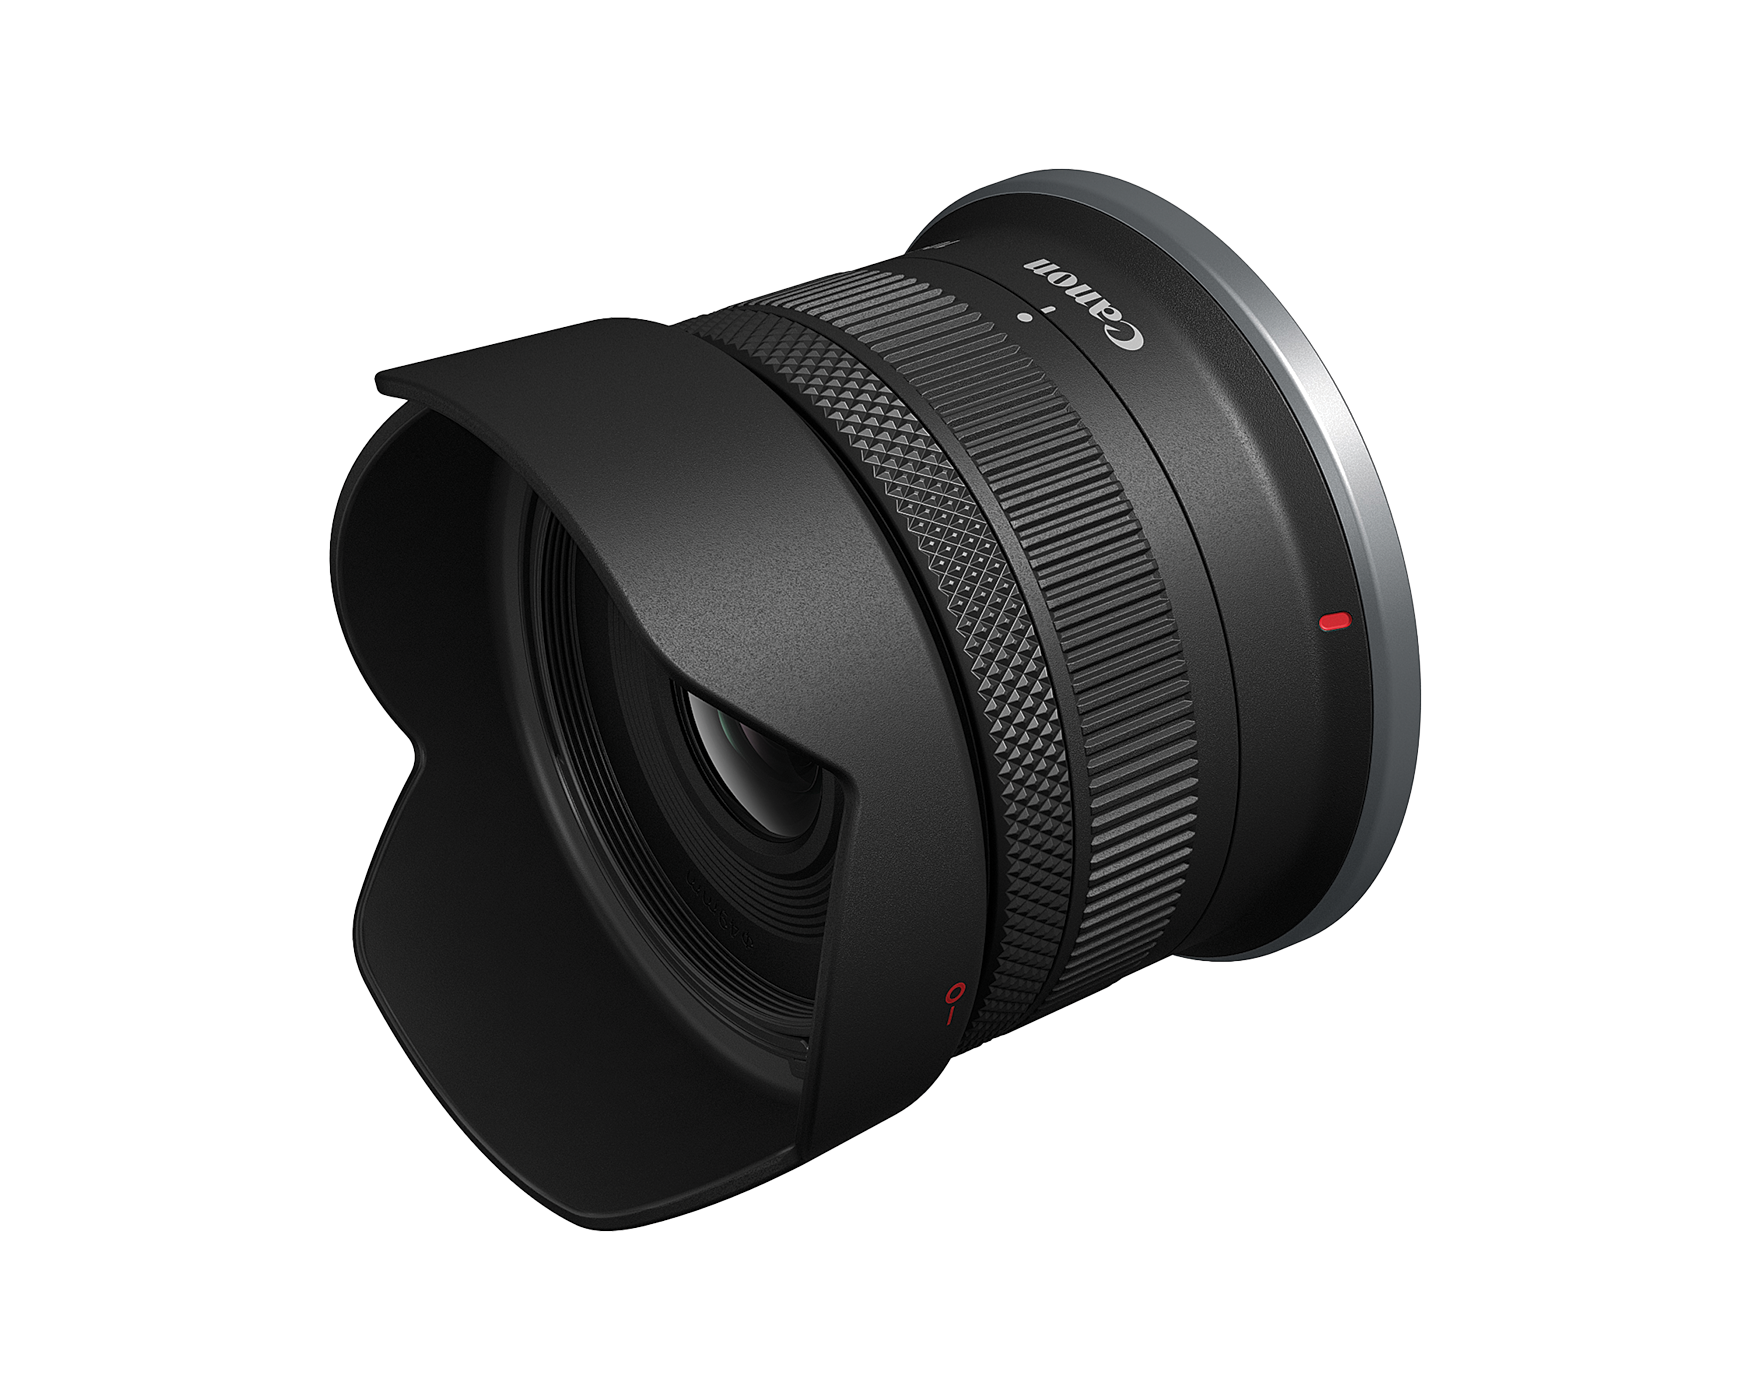 pr rf s10 18mm 3 - Canon Introduces Three New Lenses, Enhancing Still Photography and Video Production for Any Skill Level